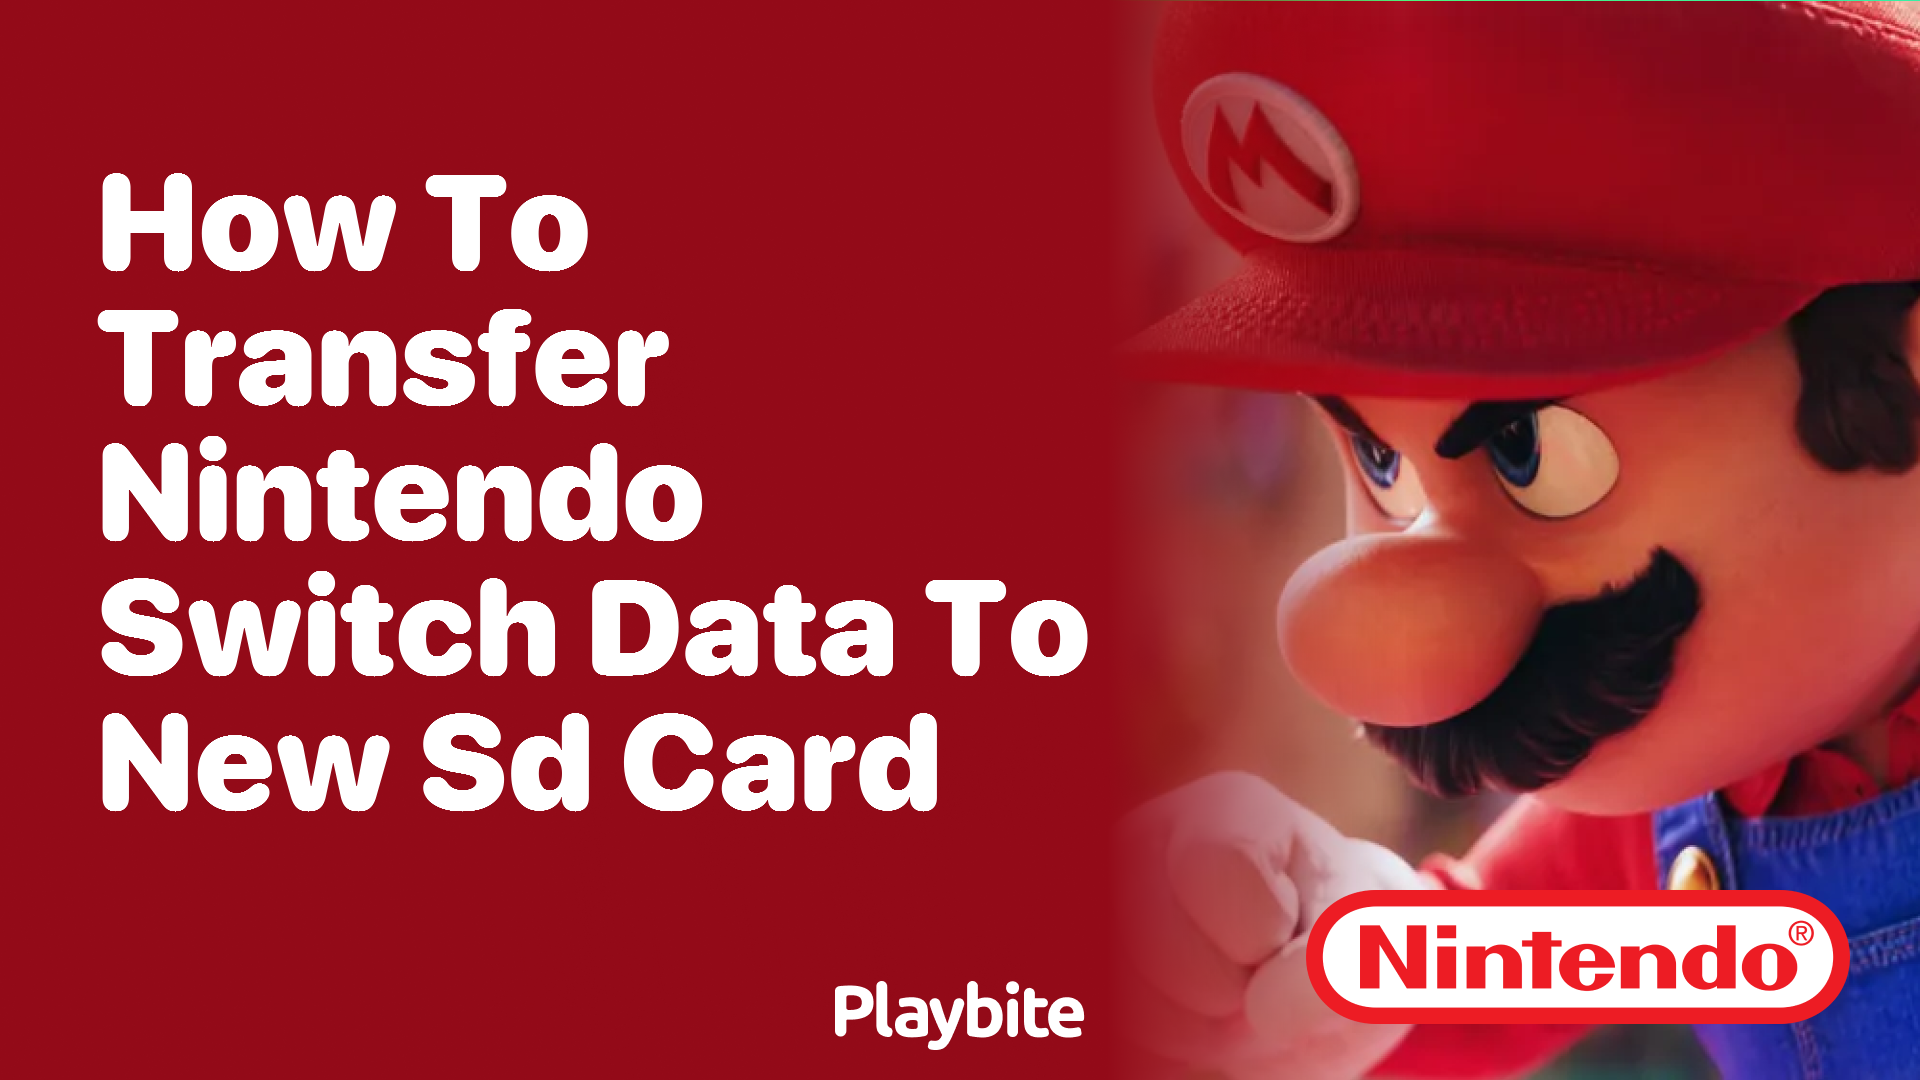 How to Transfer Nintendo Switch Data to a New SD Card - Playbite